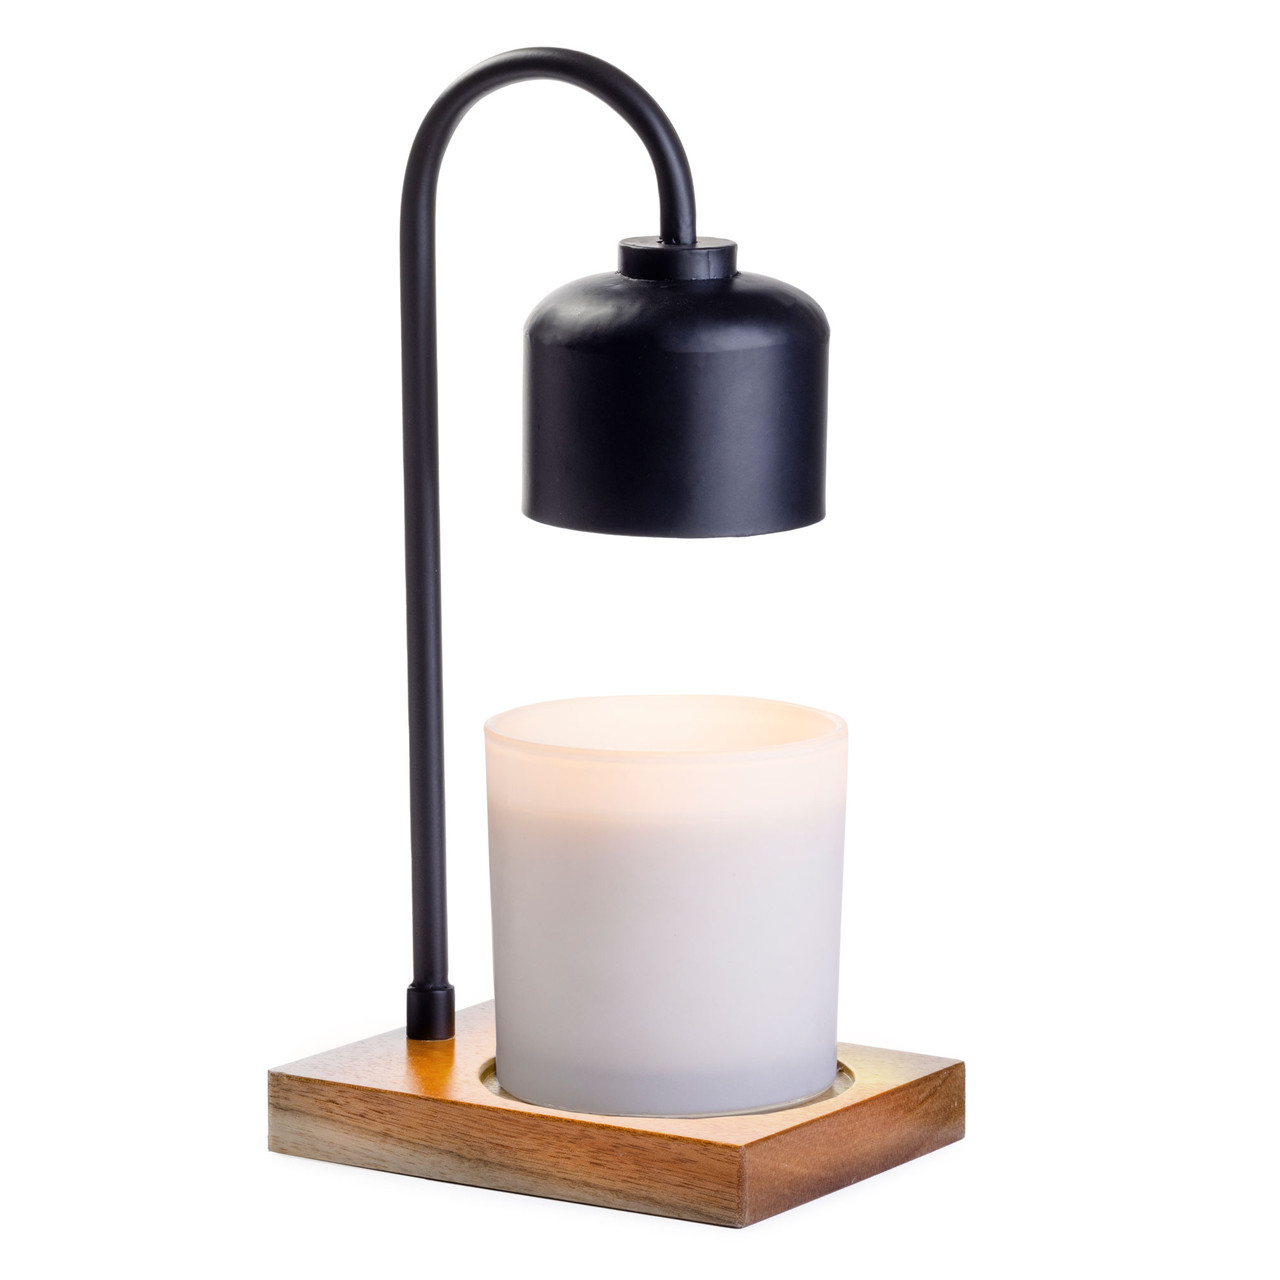 Black & Wood Arched Candle Warmer Lamp | Candle Warmers